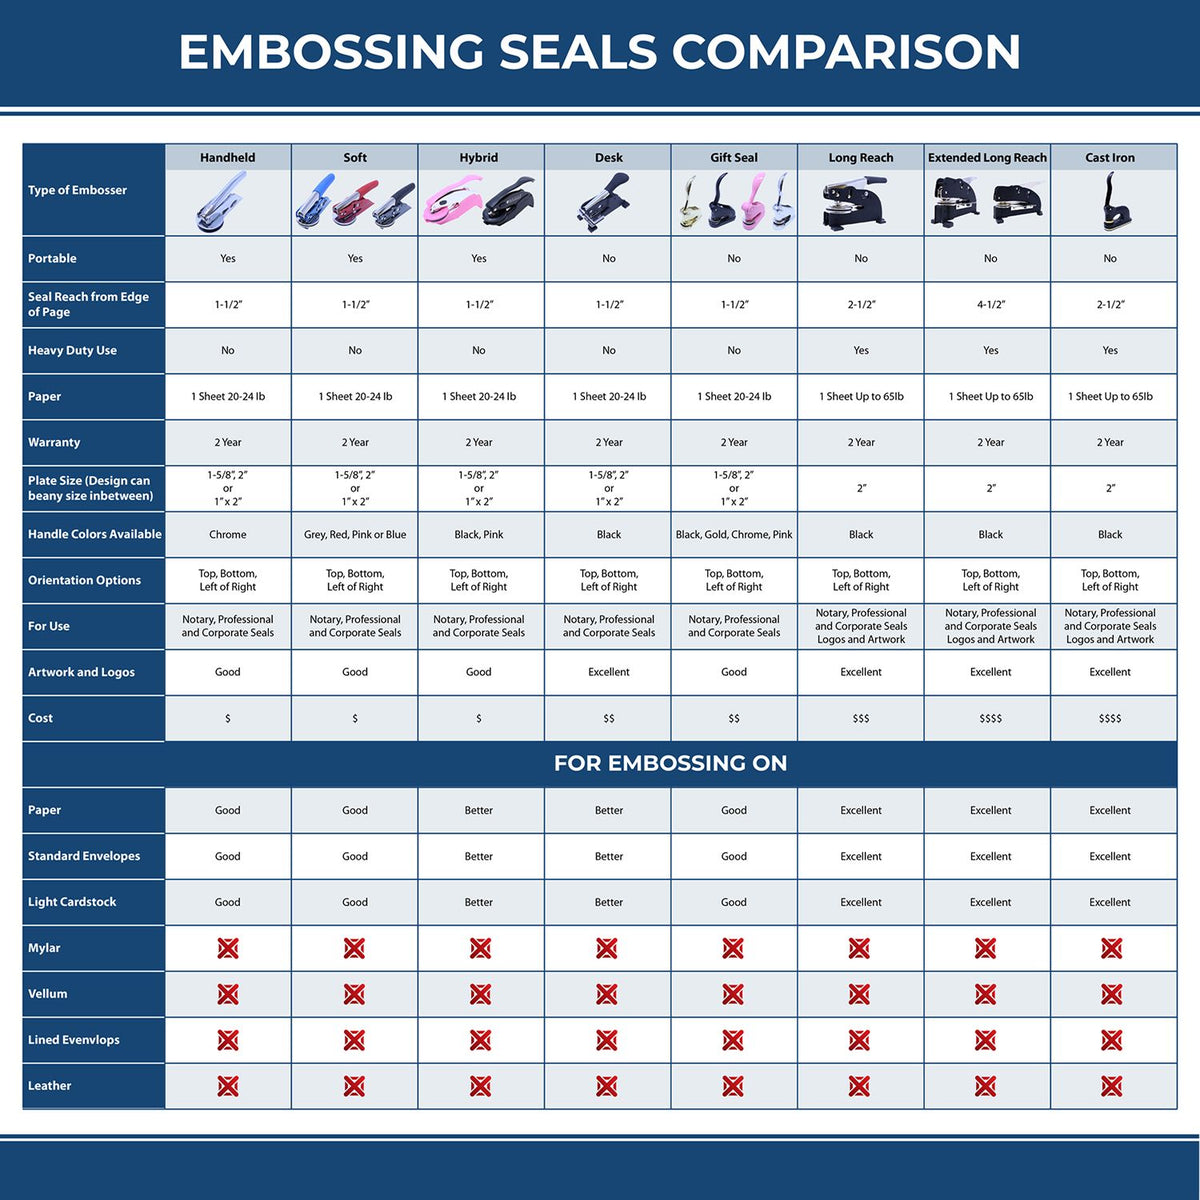 A comparison chart for the different types of mount models available for the Ohio Engineer Desk Seal.